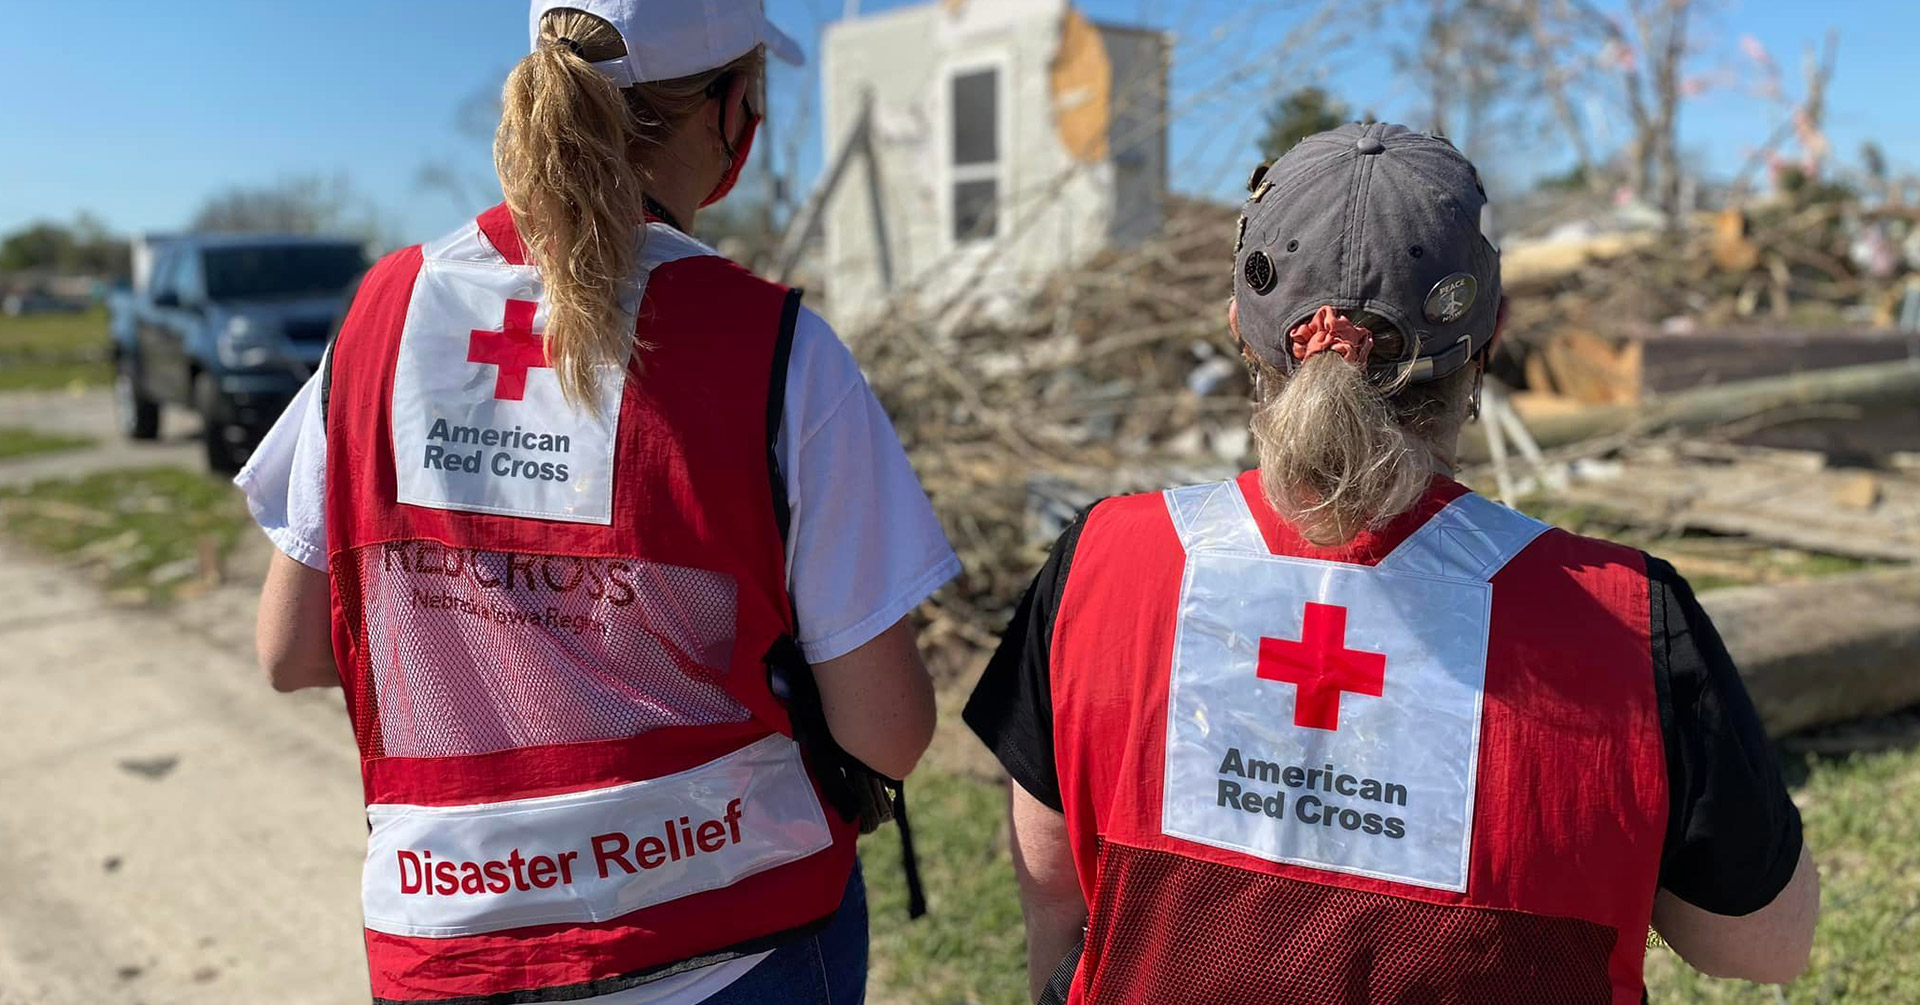 Behind the Scenes: Life as a Red Cross Disaster Responder